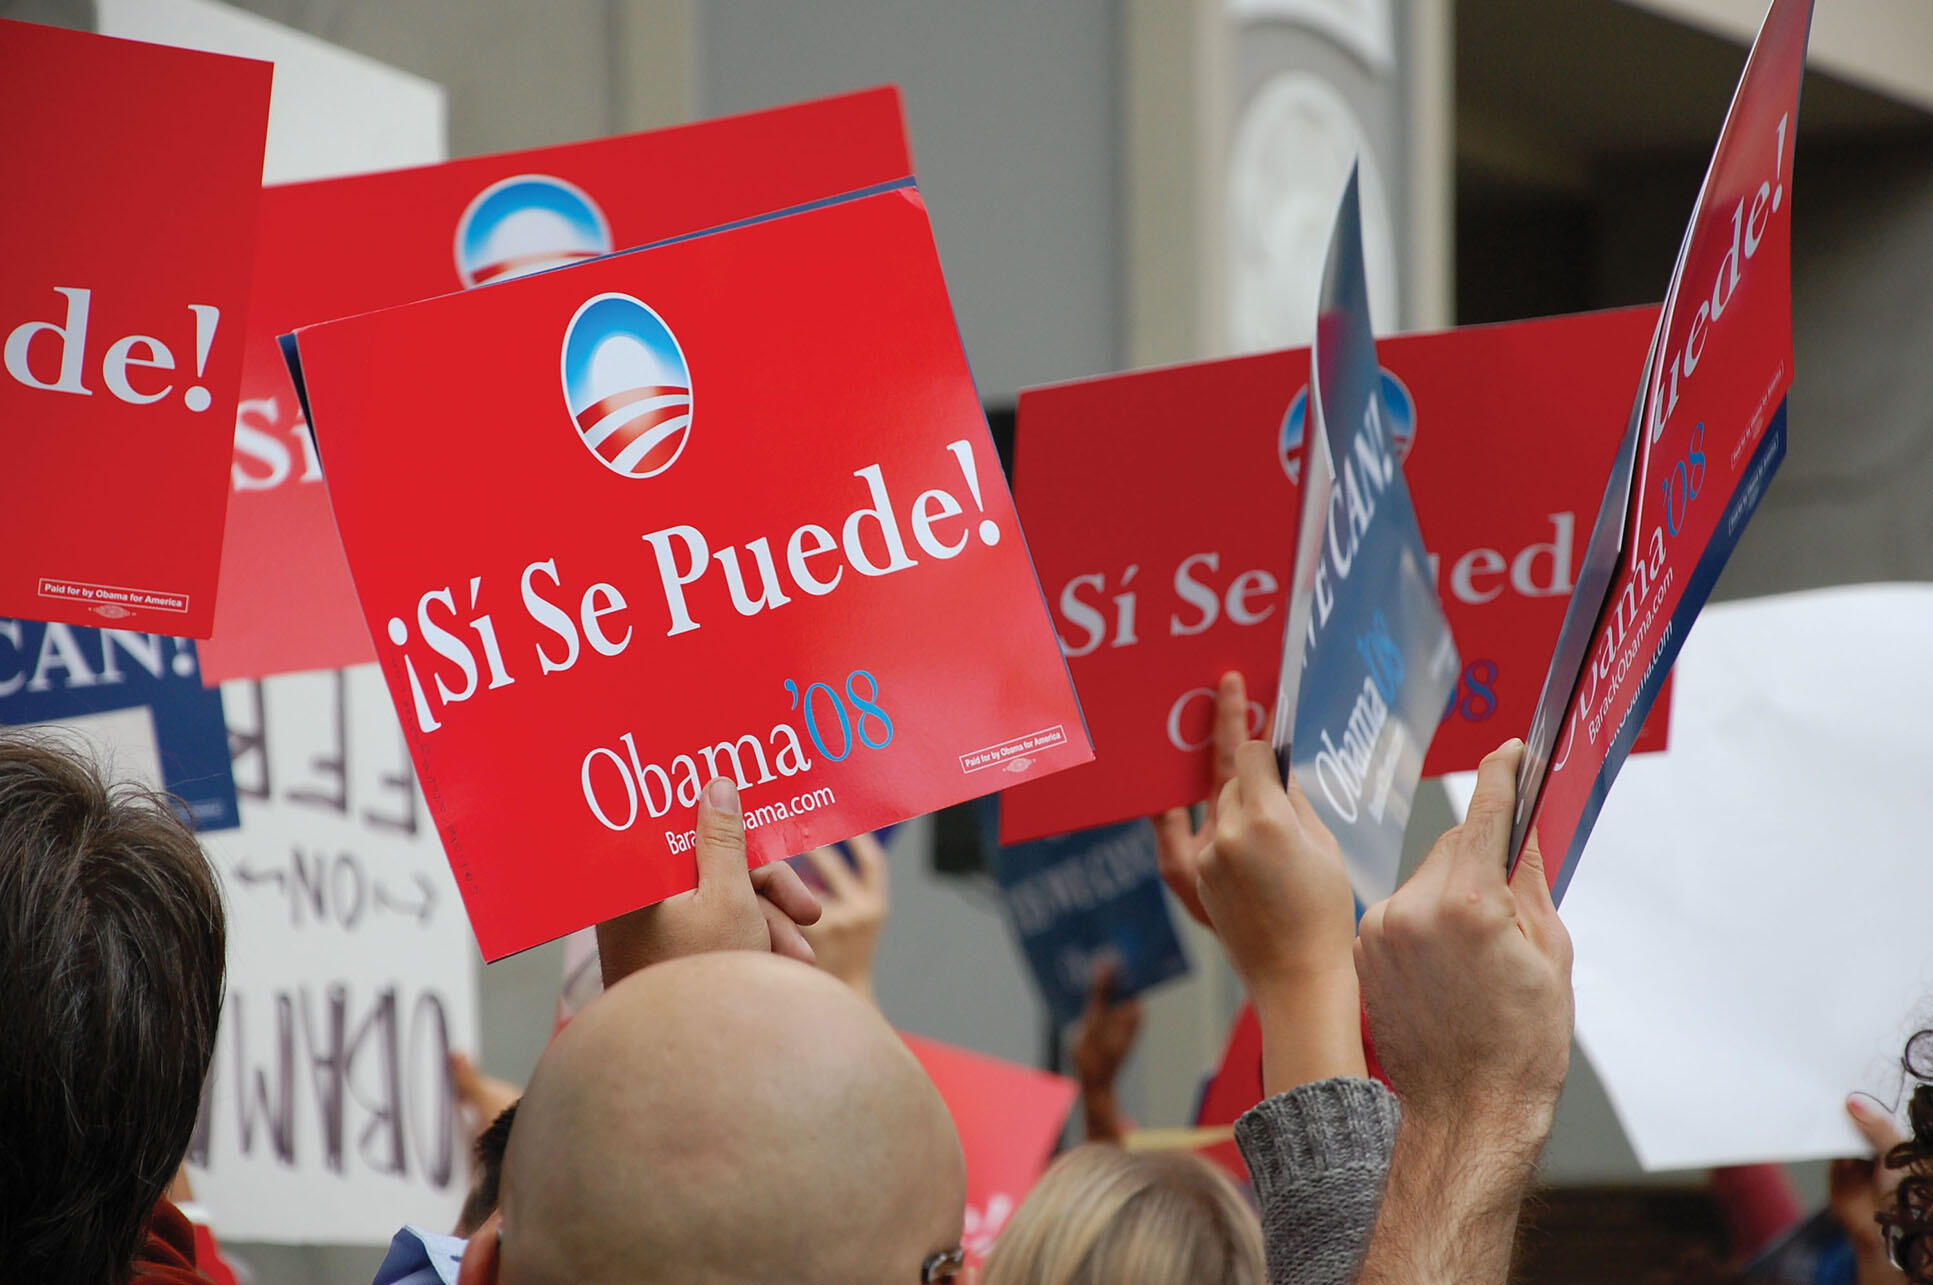 These Spanish-language signs demonstrate that Hispanics became a sought-after demographic in the 2008 presidential campaign. (Photo courtesy of Barack Obama.)